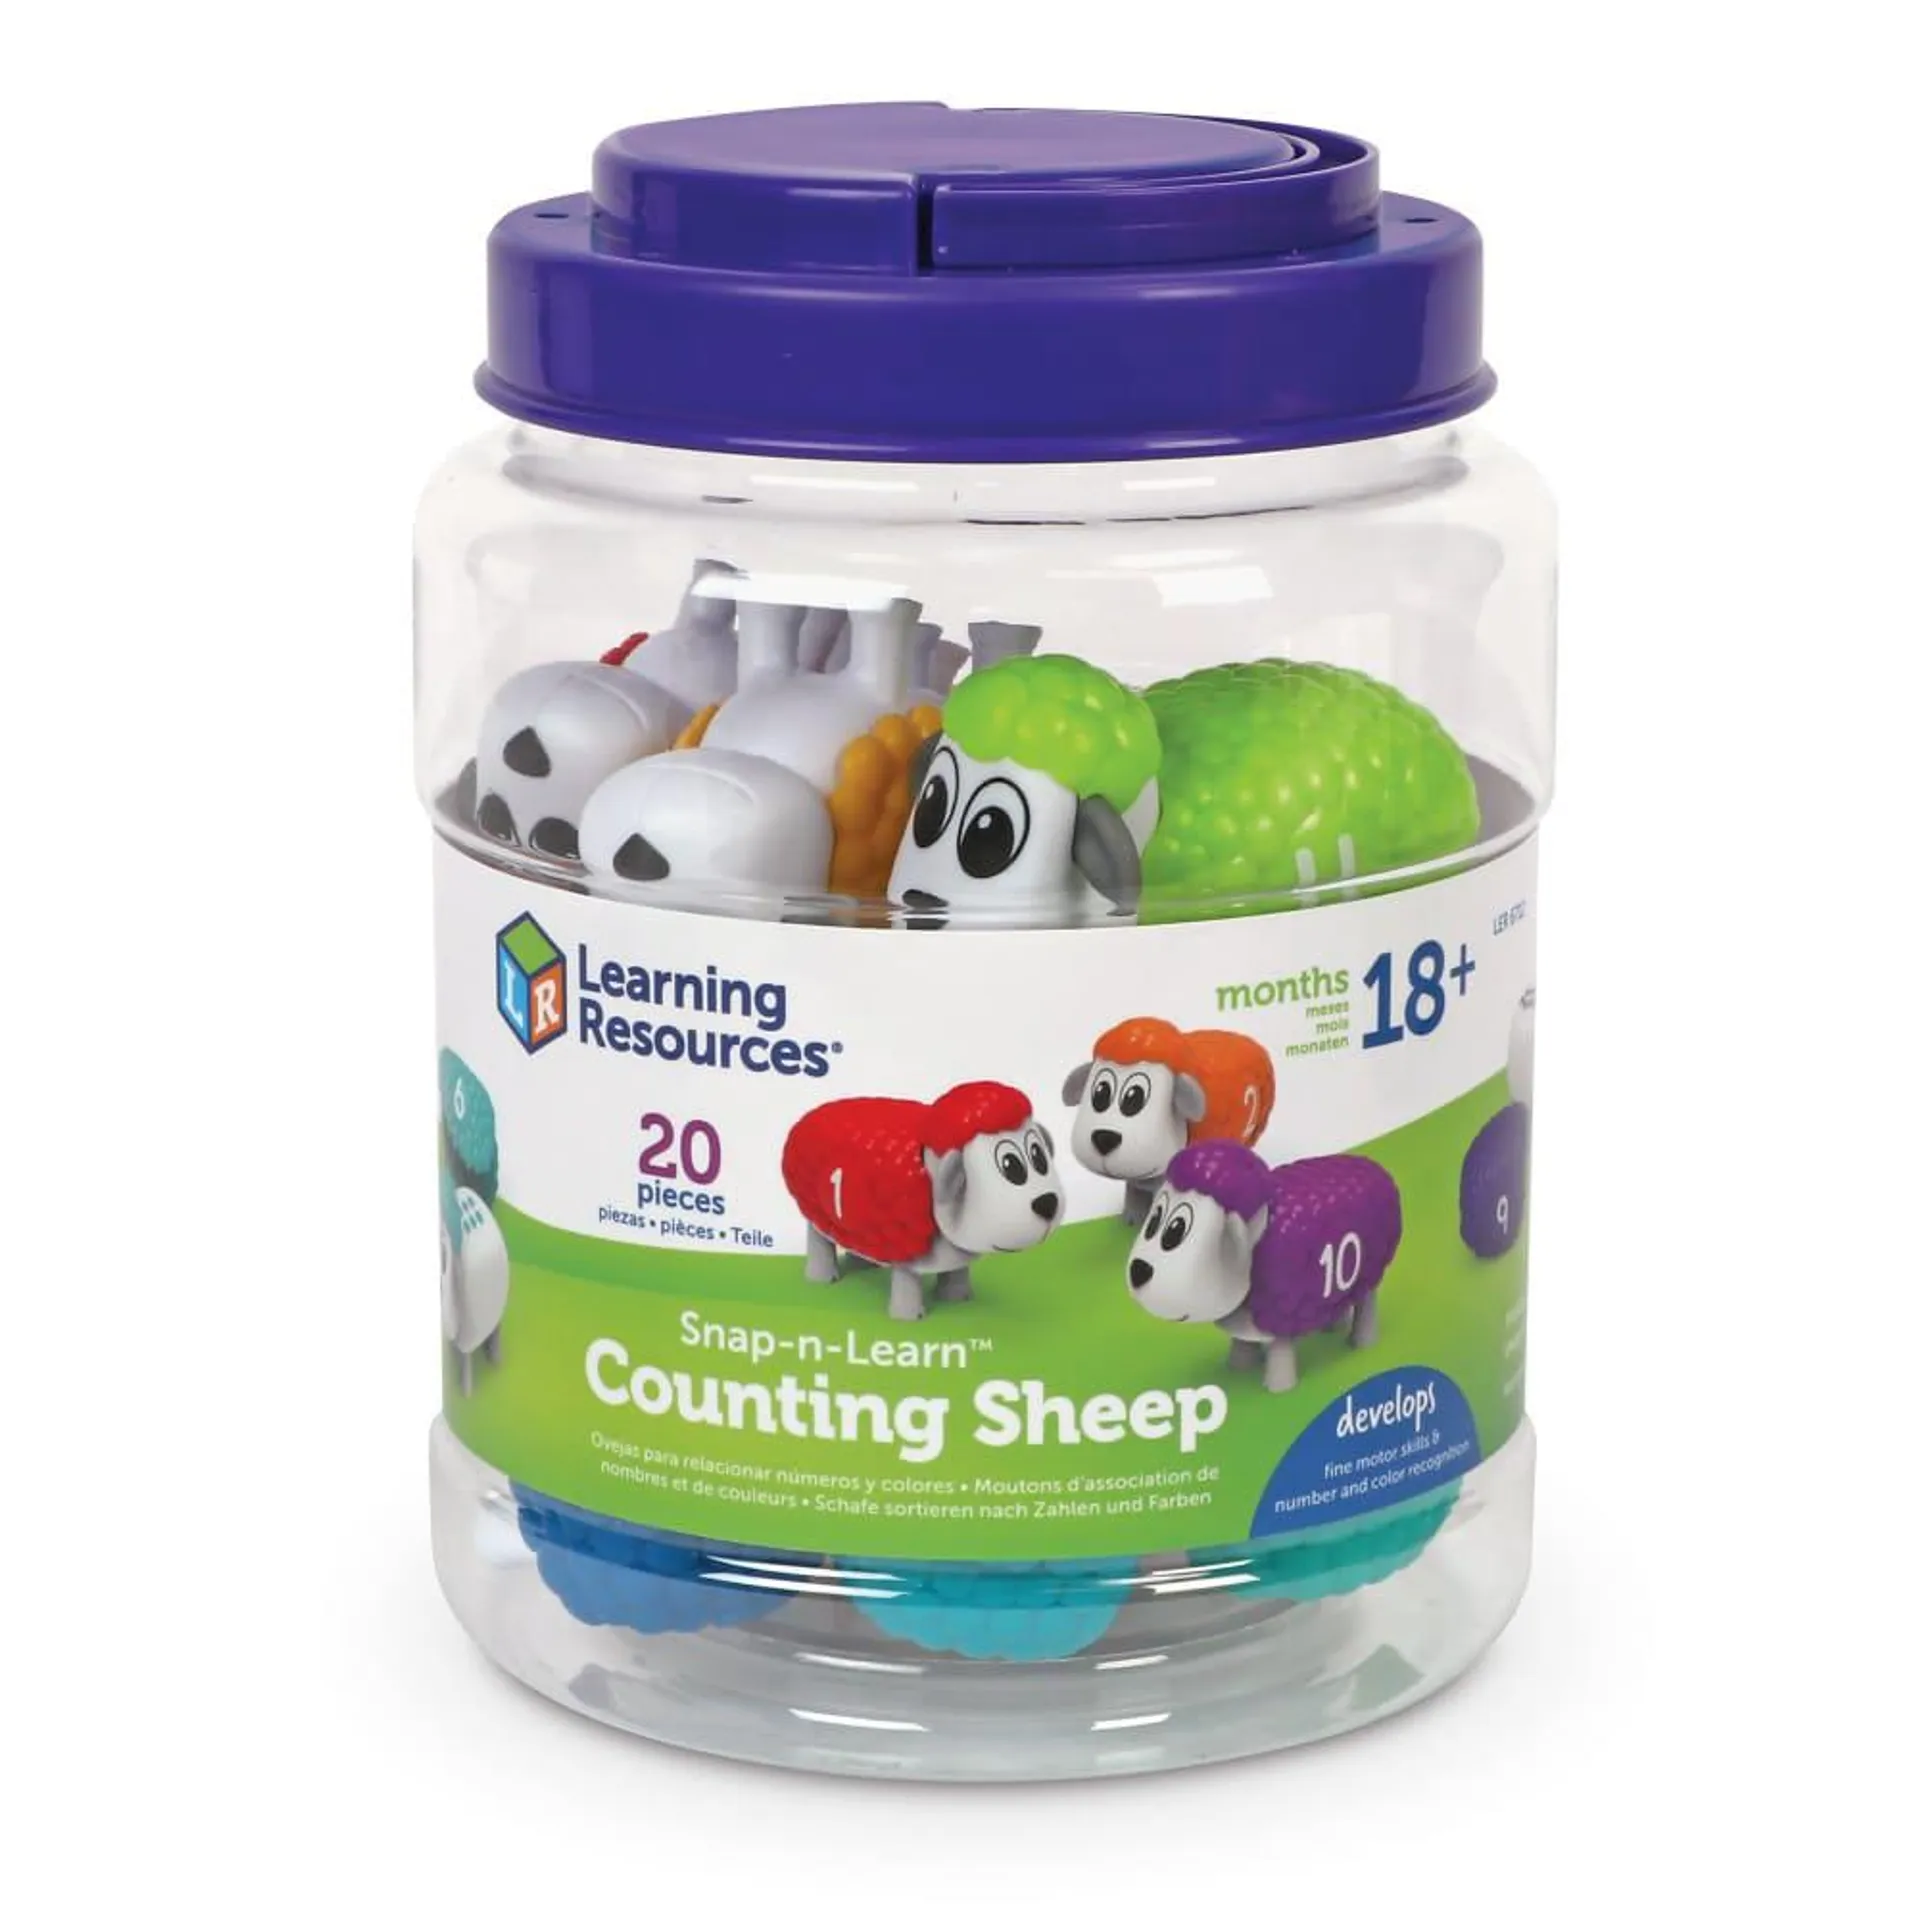 Snap-N-Learn Counting Sheep